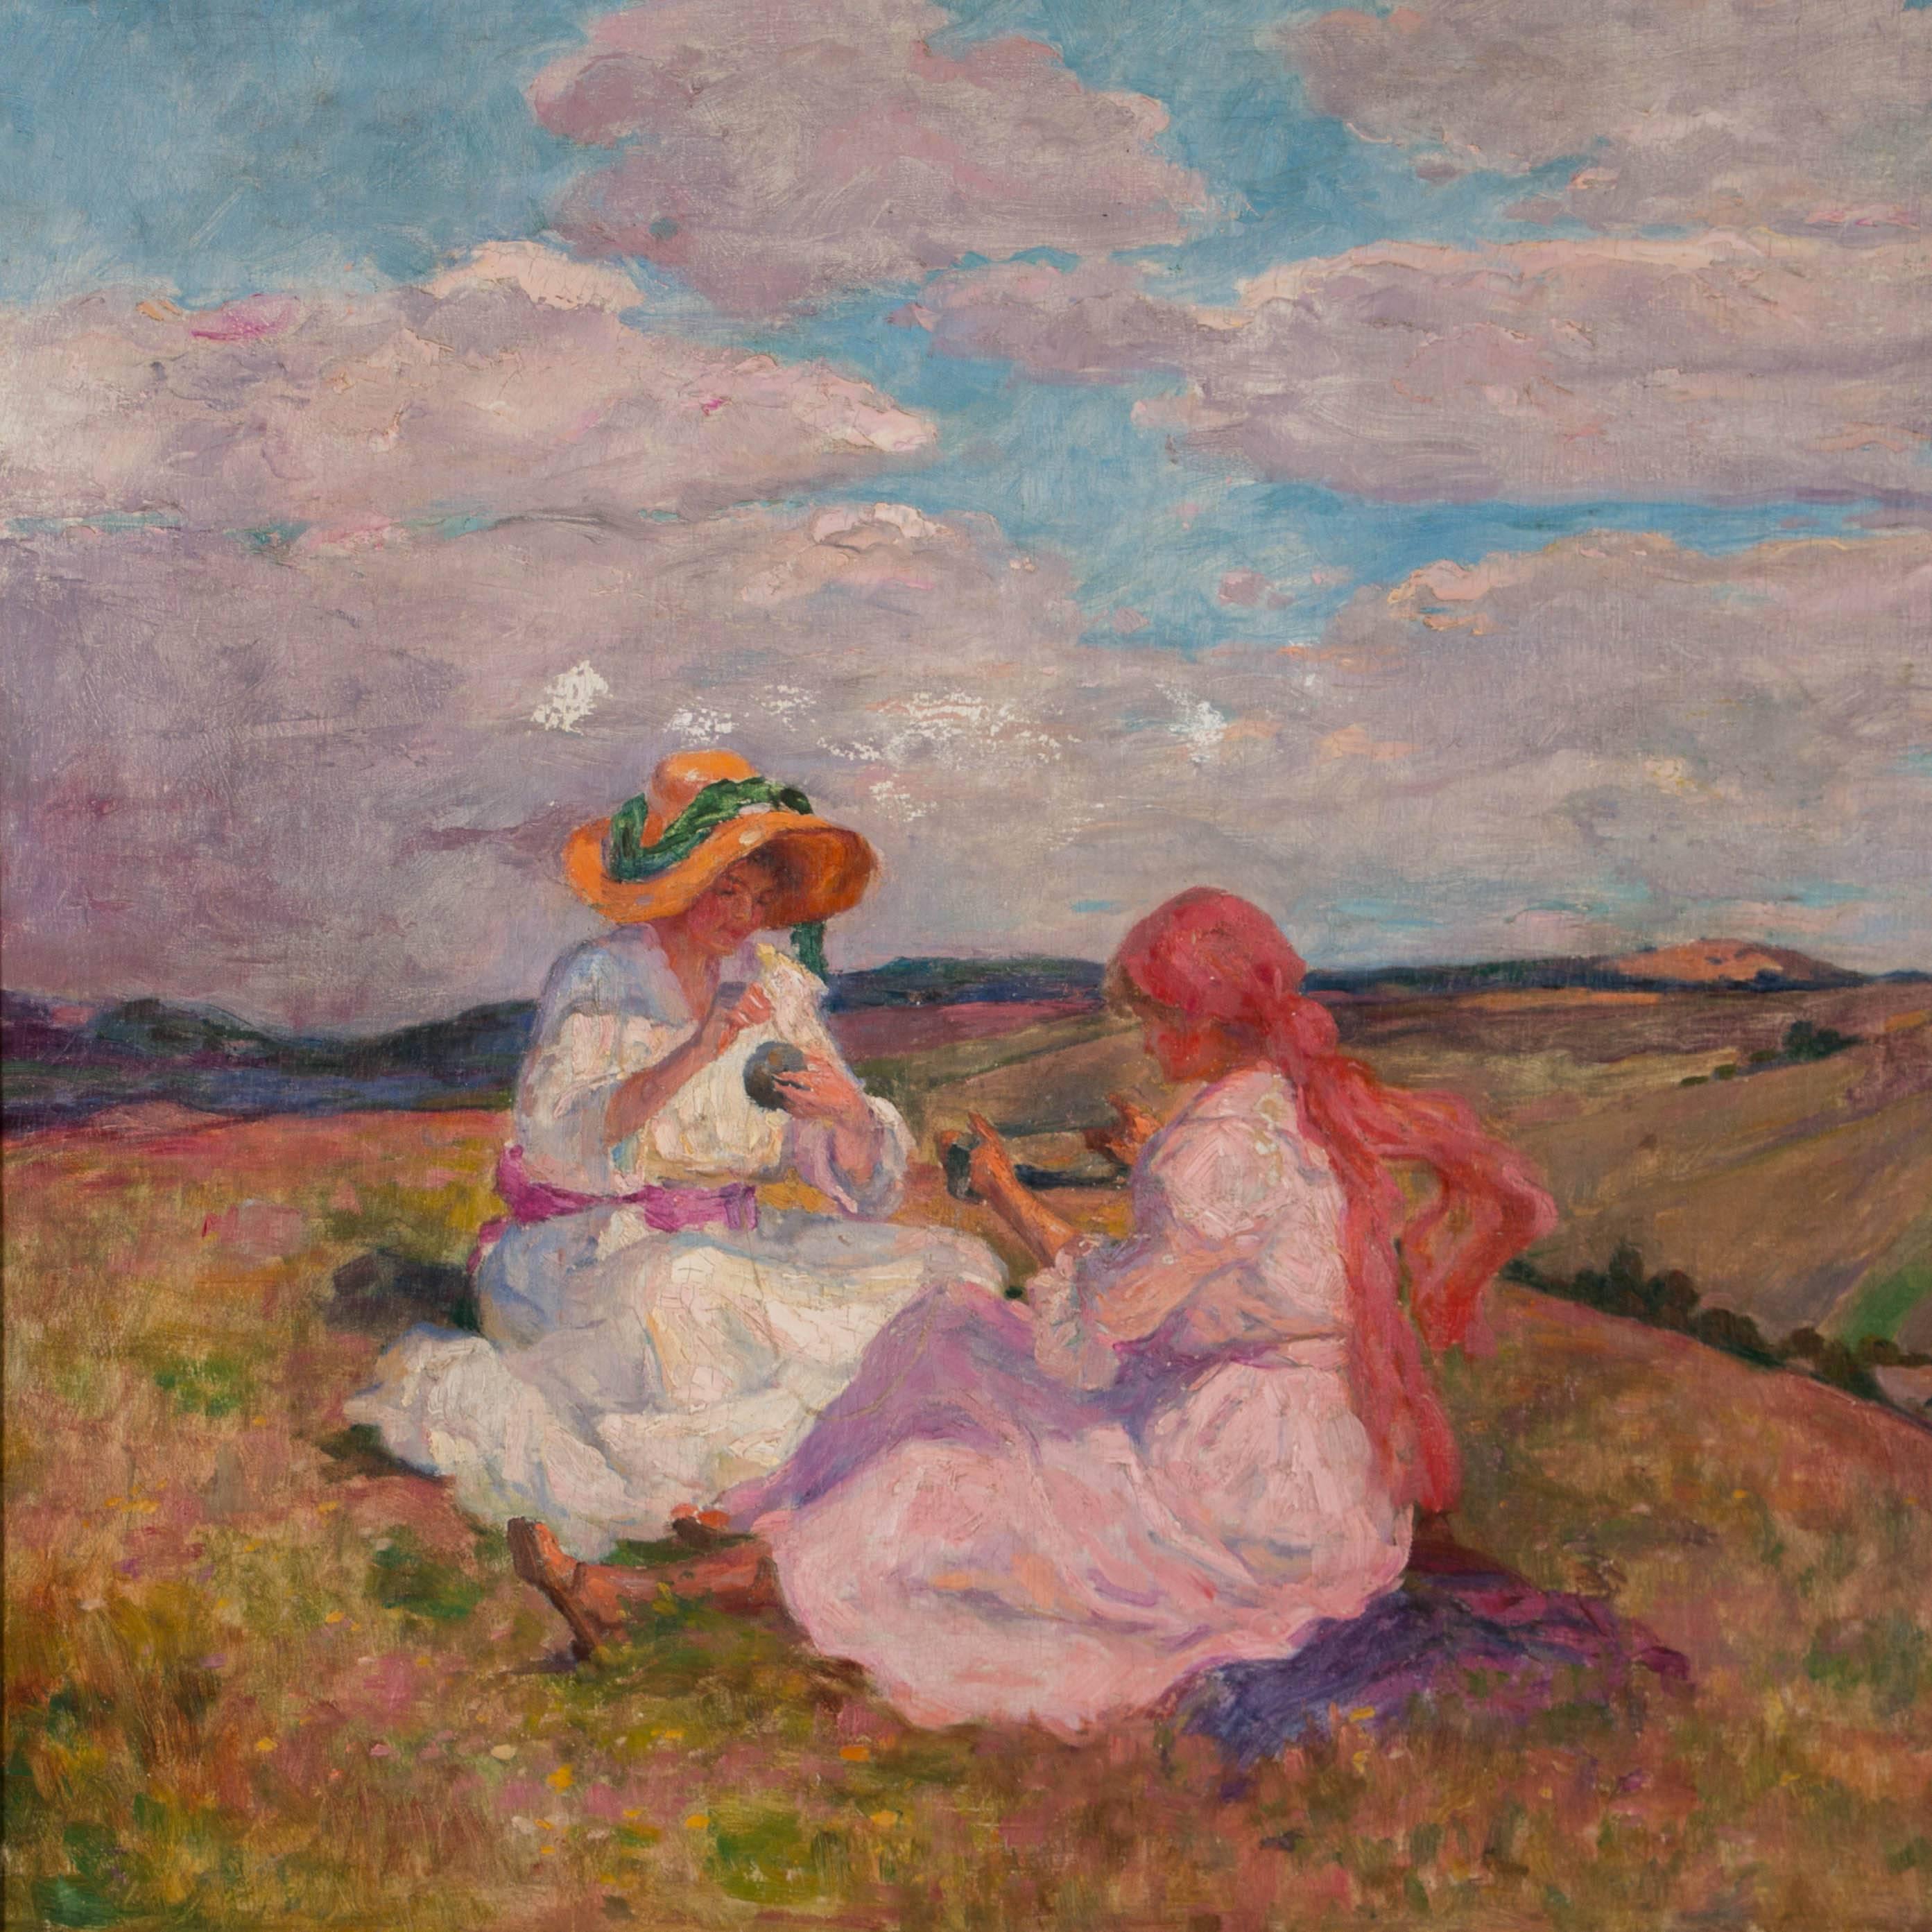 Hungarian Antique Oil LandscapePainting of Two Girls on Hilltop, signed Valerie Telkessy